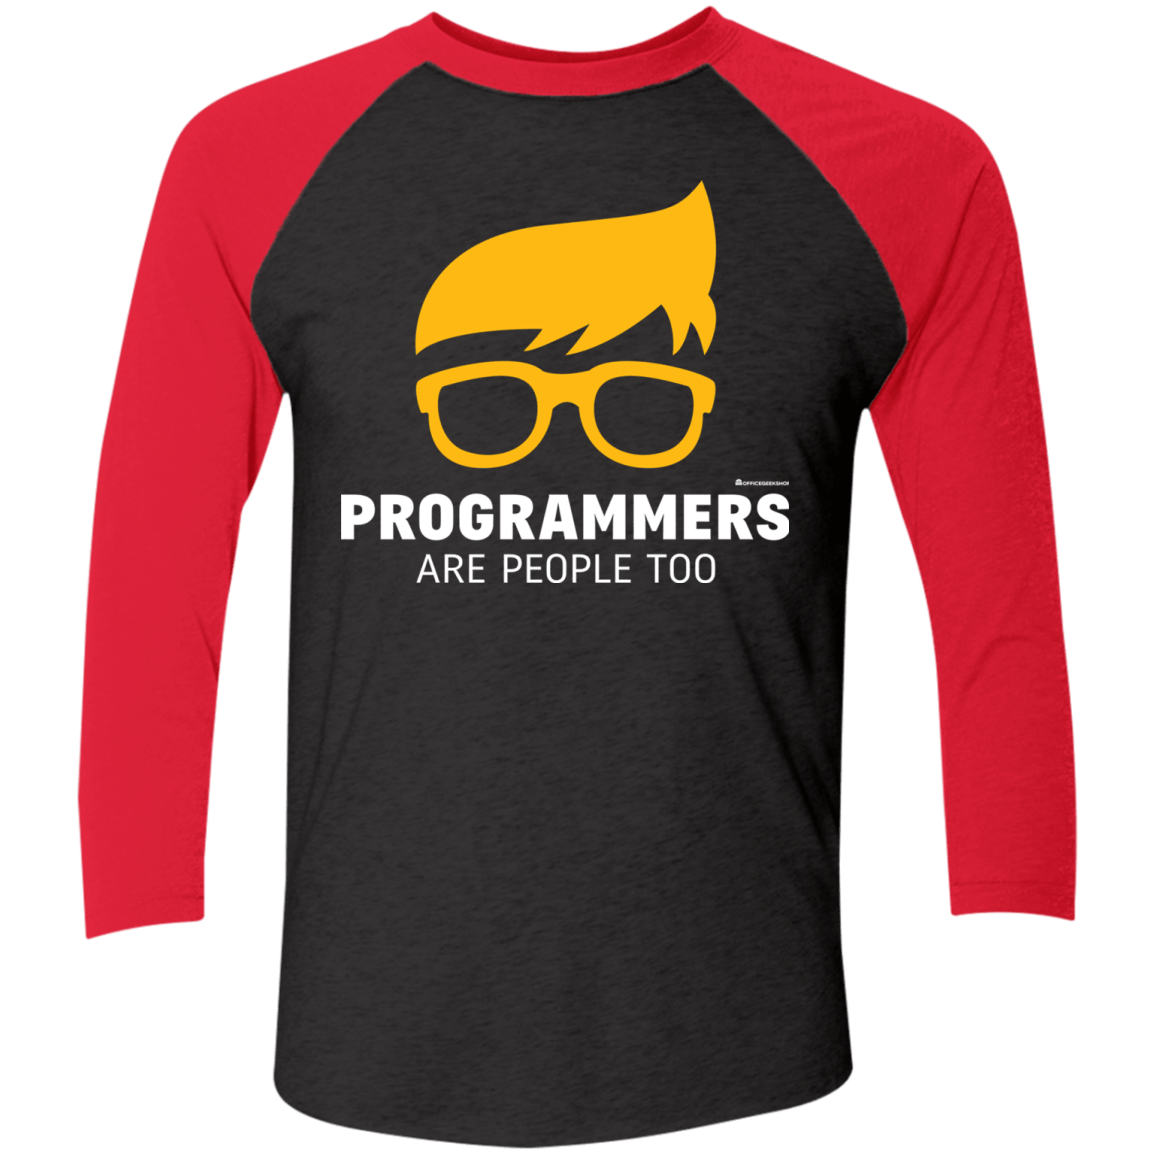 T-Shirts Vintage Black/Vintage Red / X-Small Programmers Are People Too Men's Triblend 3/4 Sleeve